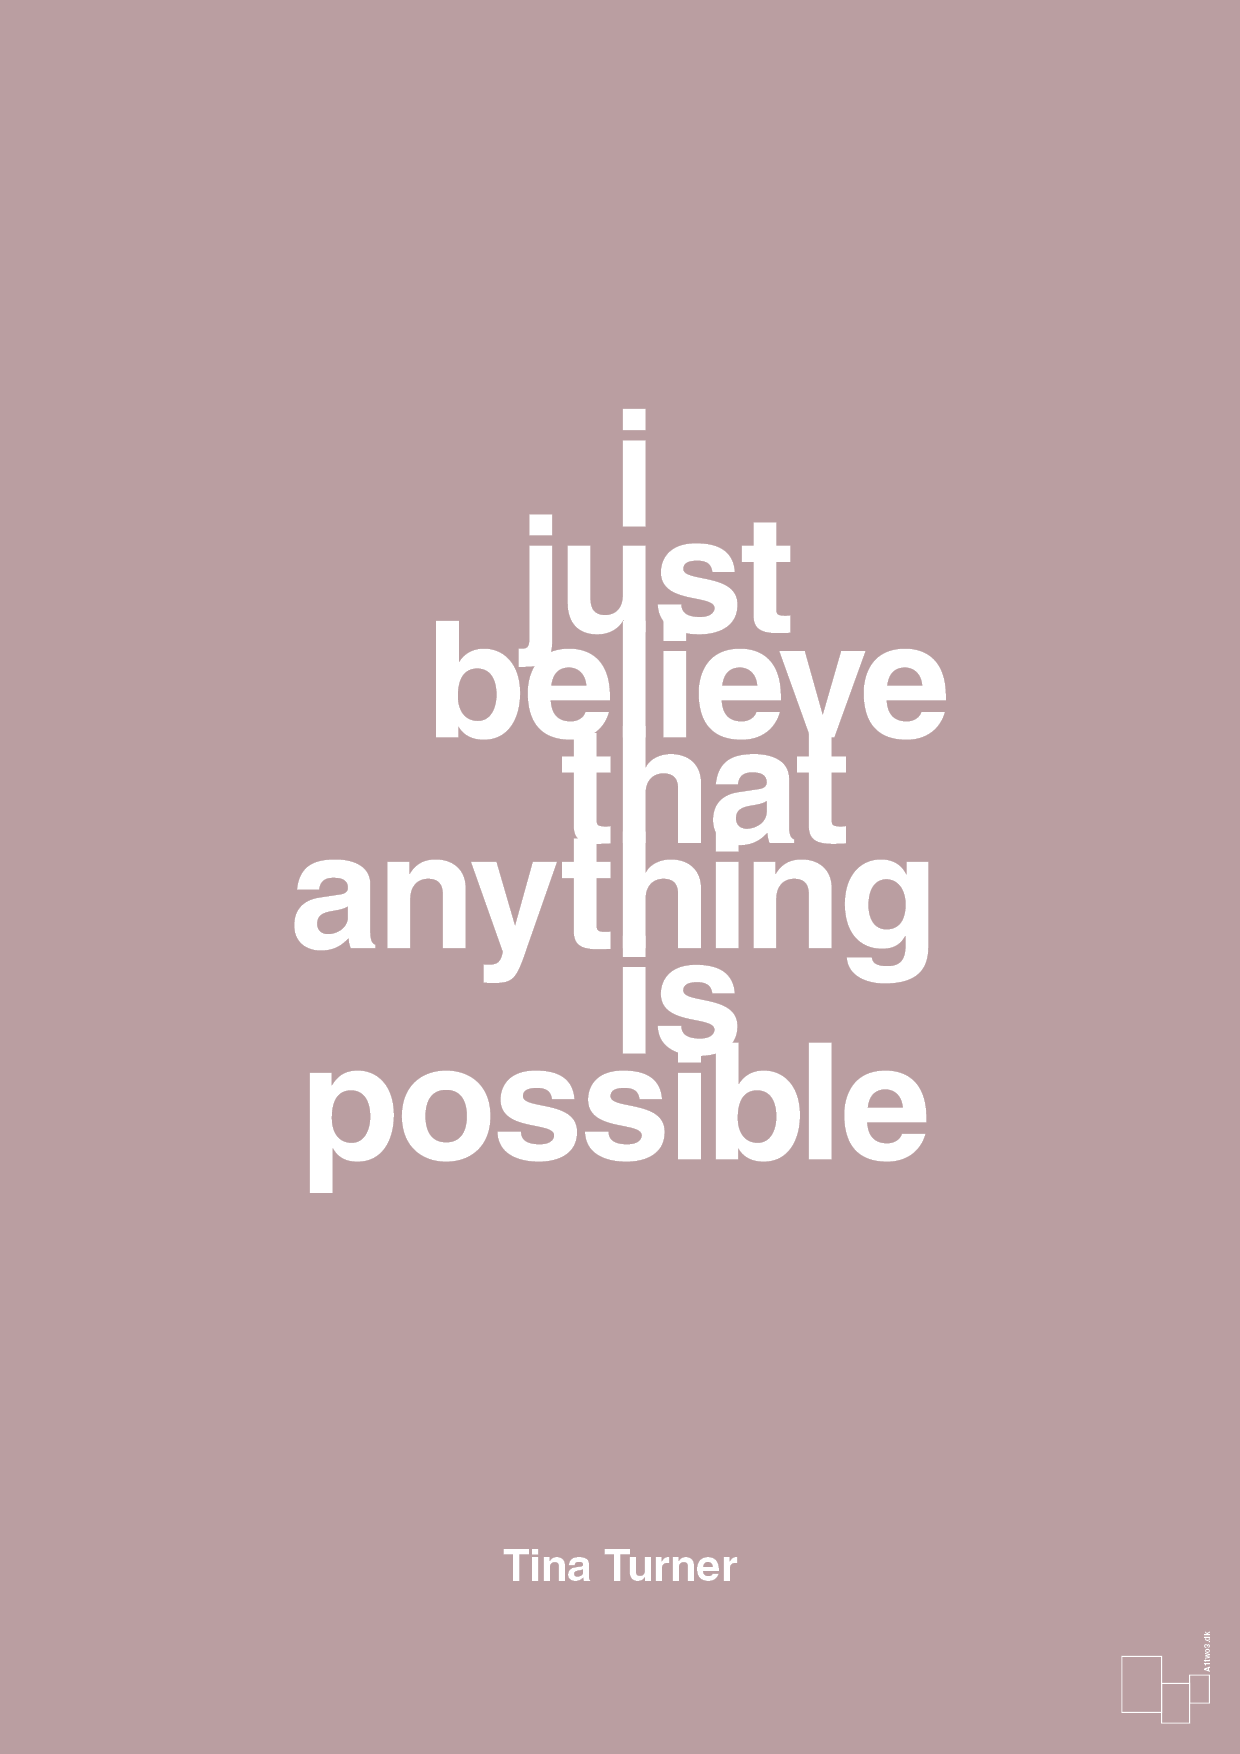 i just believe that anything is possible - Plakat med Citater i Light Rose